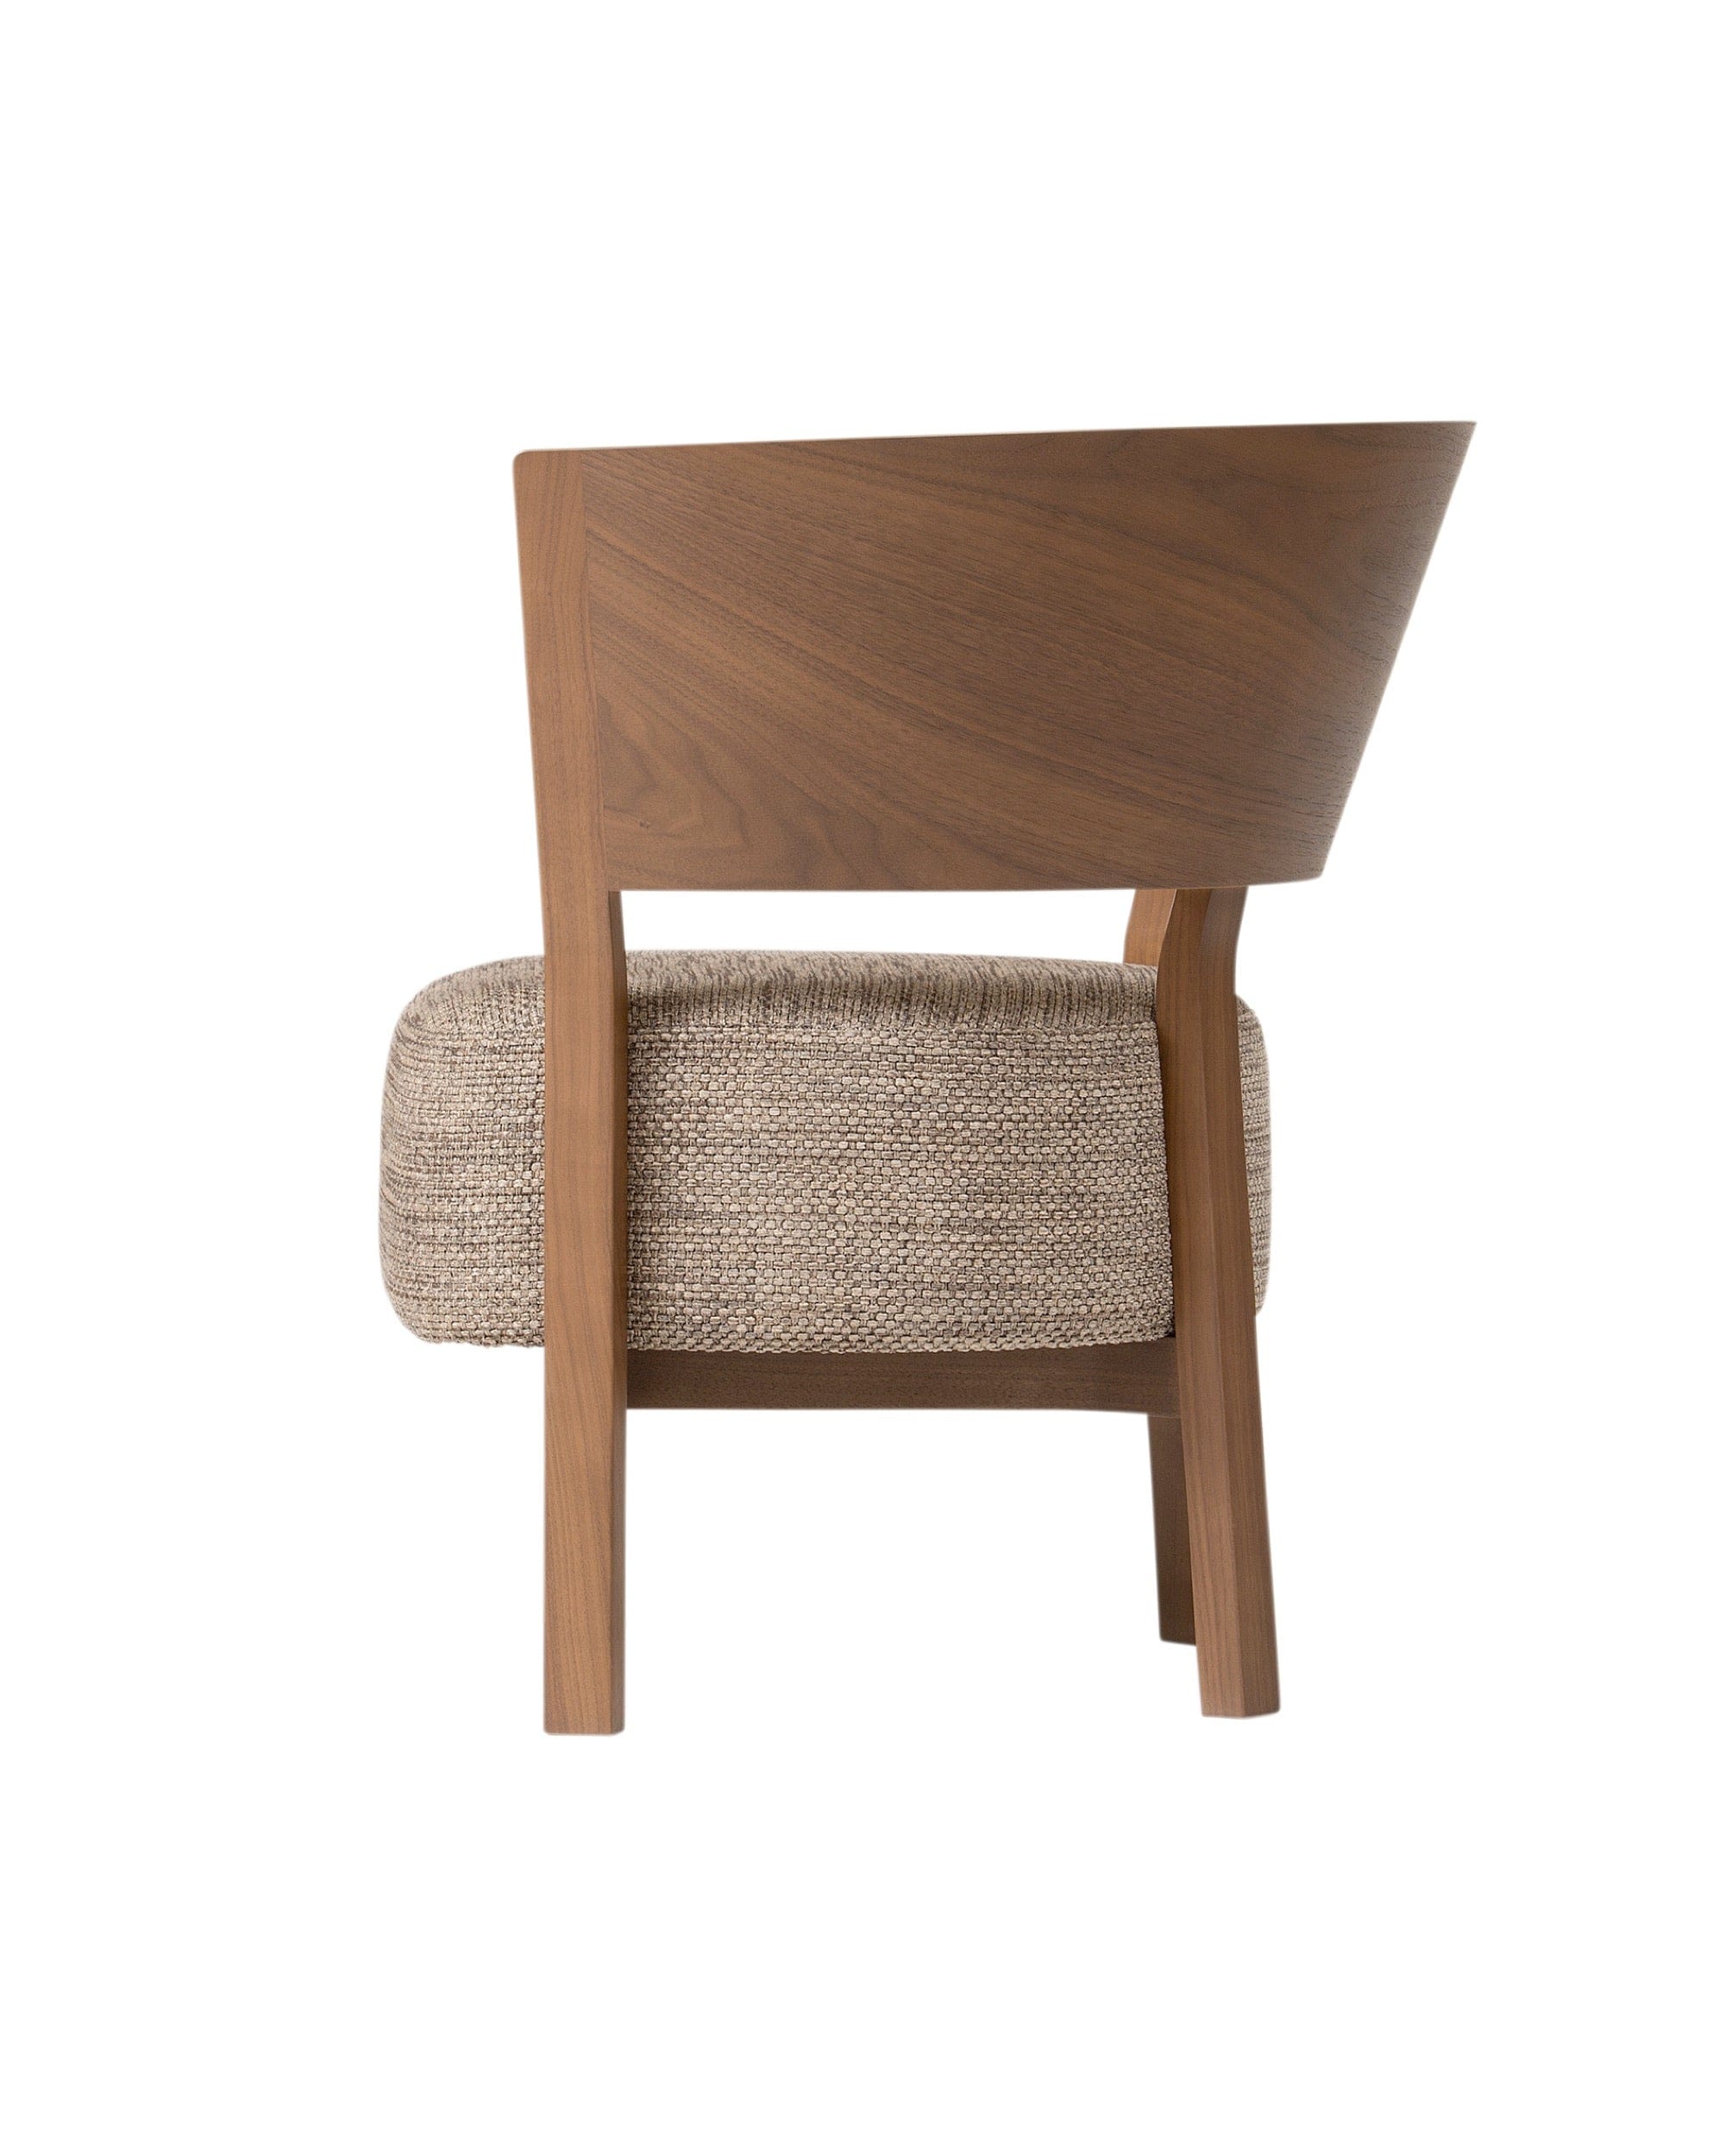 TOSAI Lounge Chair, Walnut Natural